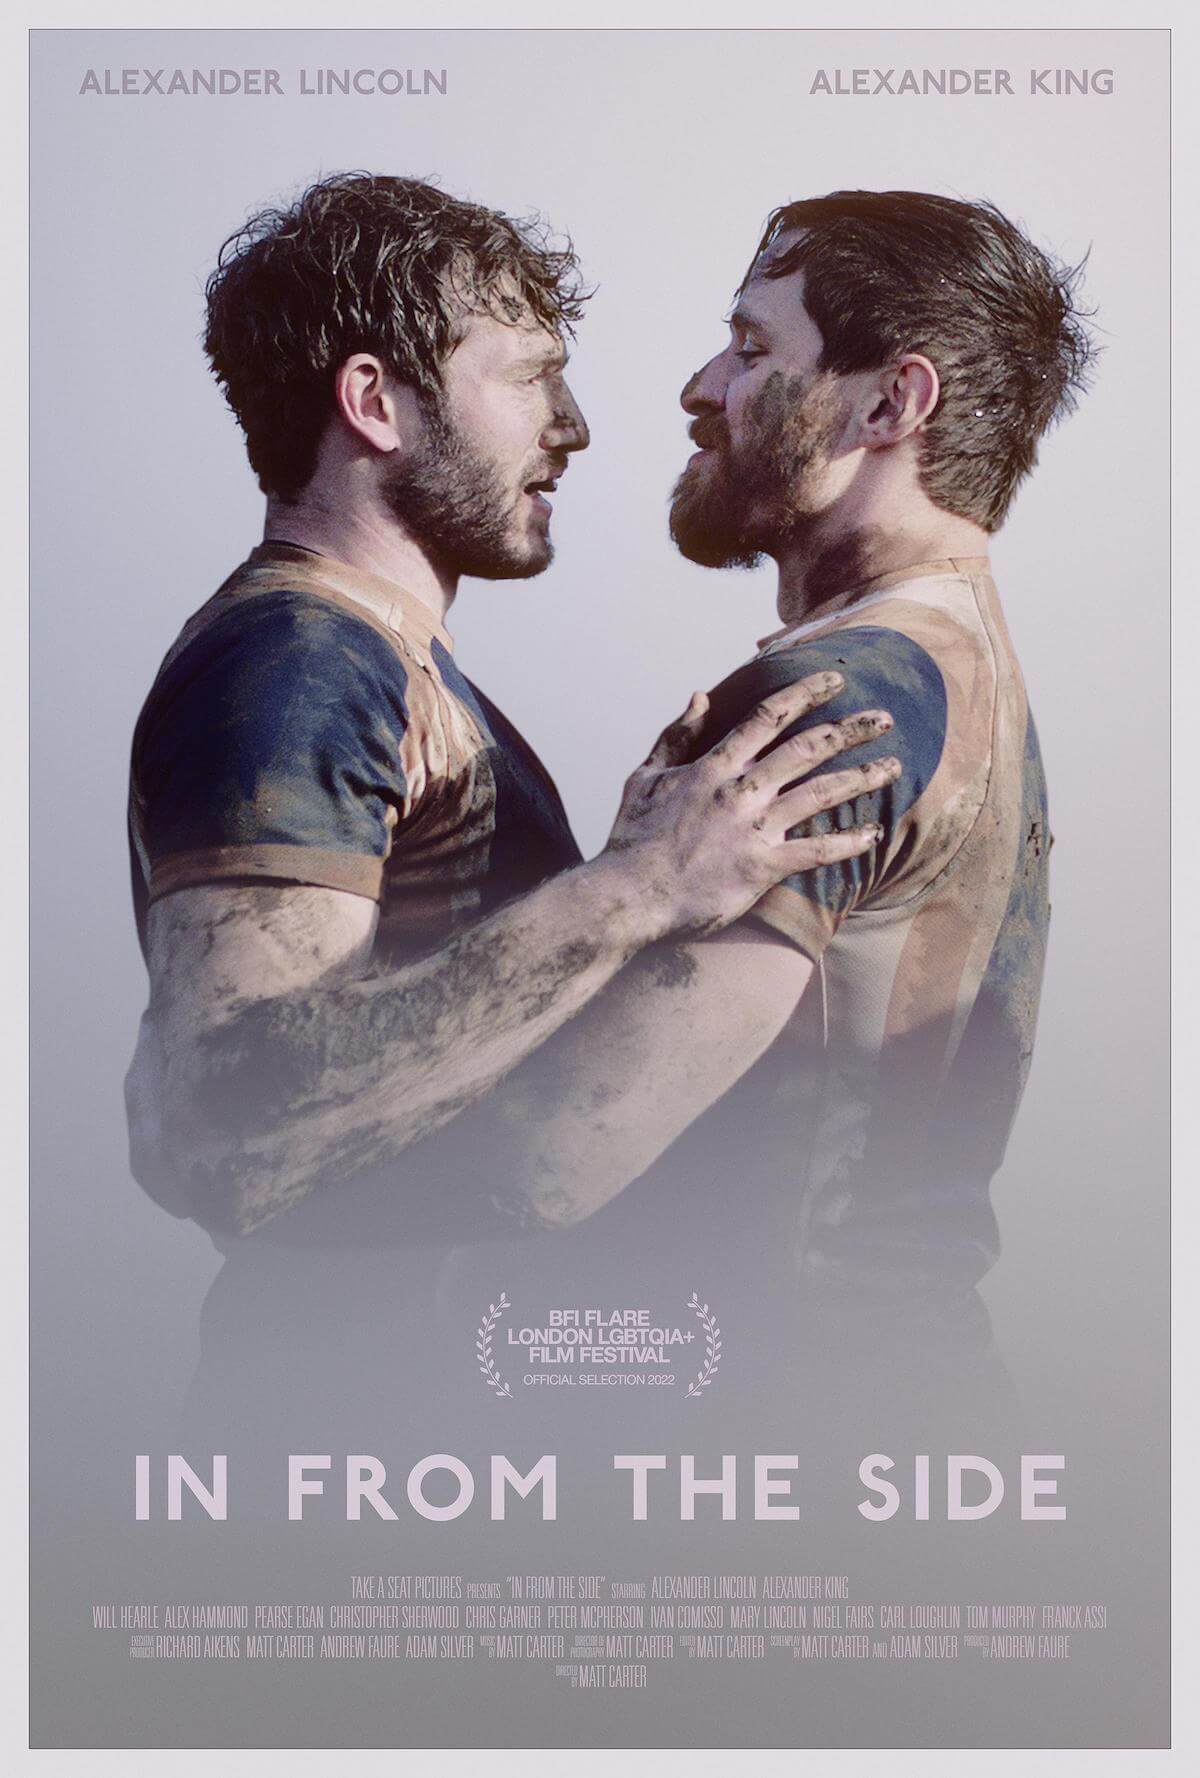 Lovers Torino 2022, i rugbisti gay di "In from the Side" inaugurano il Festival. La recensione - In from the Side - Gay.it